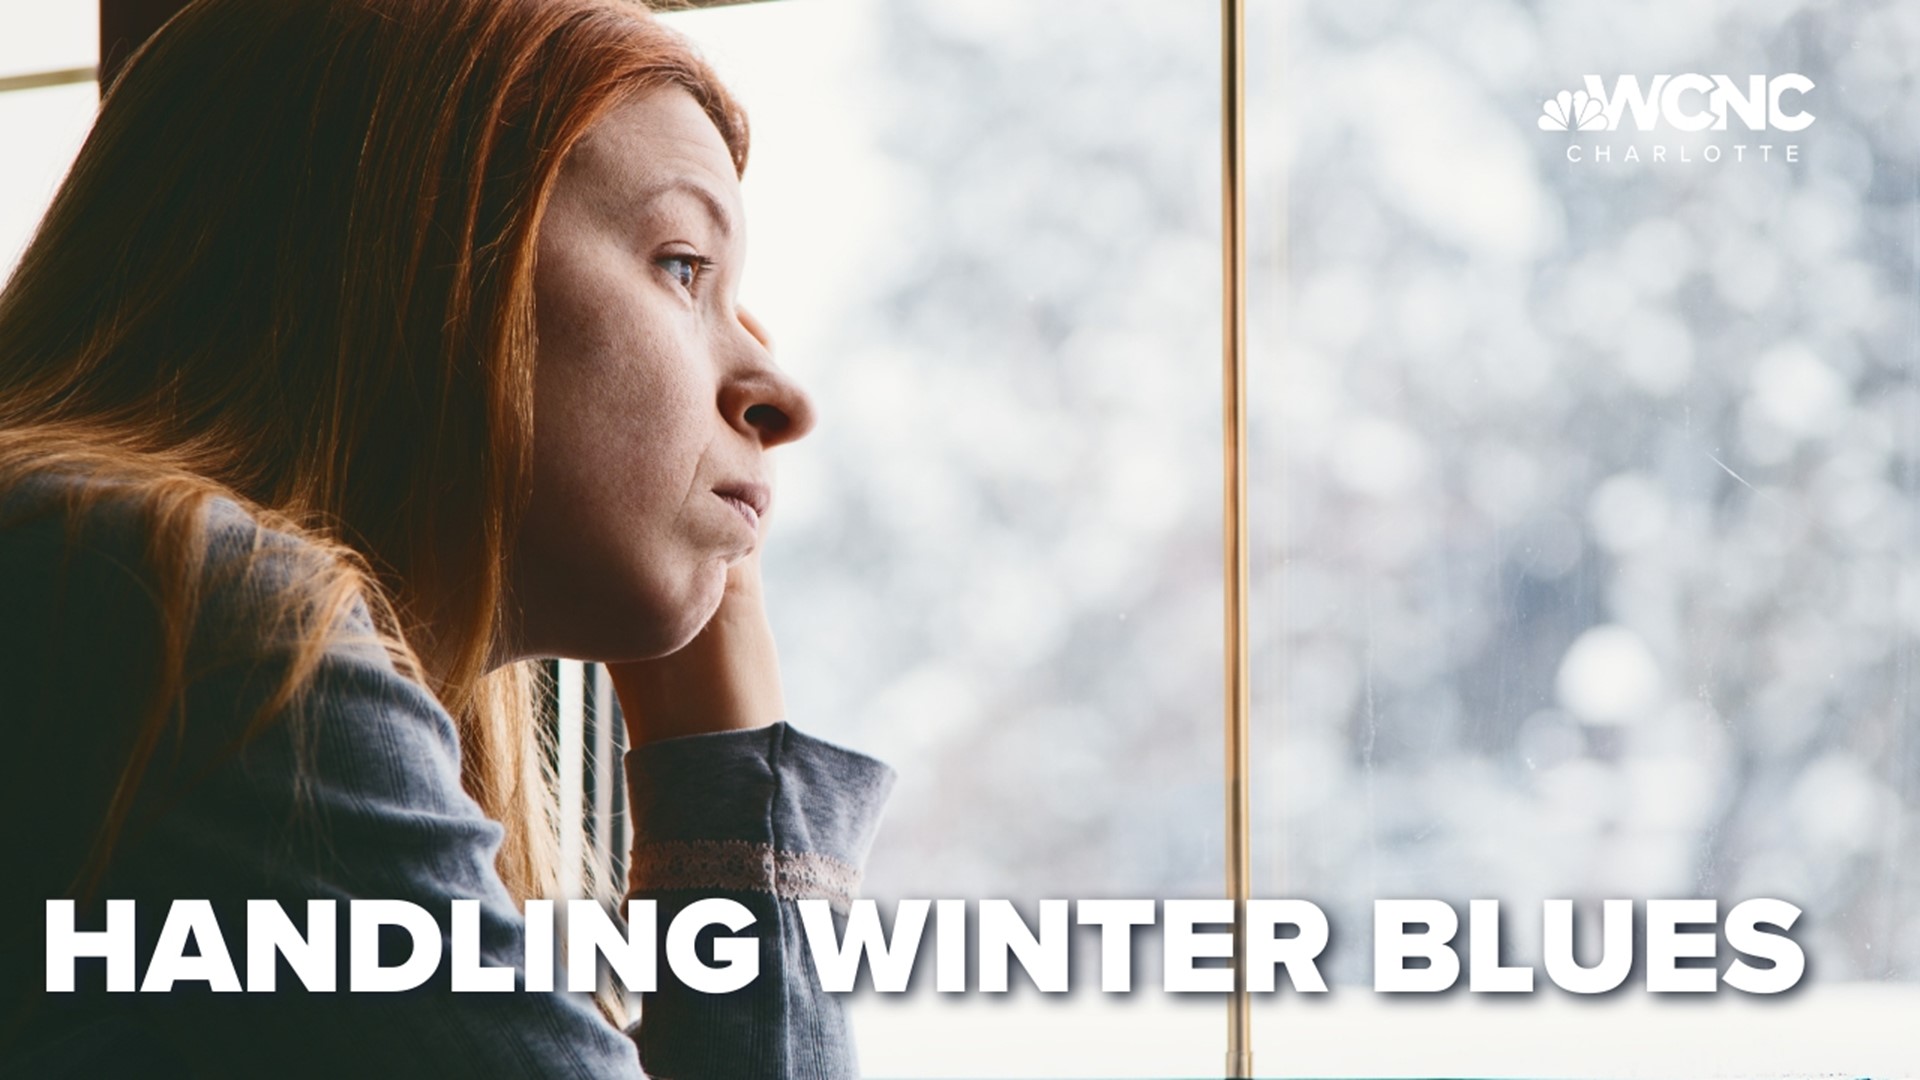 There's no exact cause for winter blues, but there are plenty of ideas to help combat them.